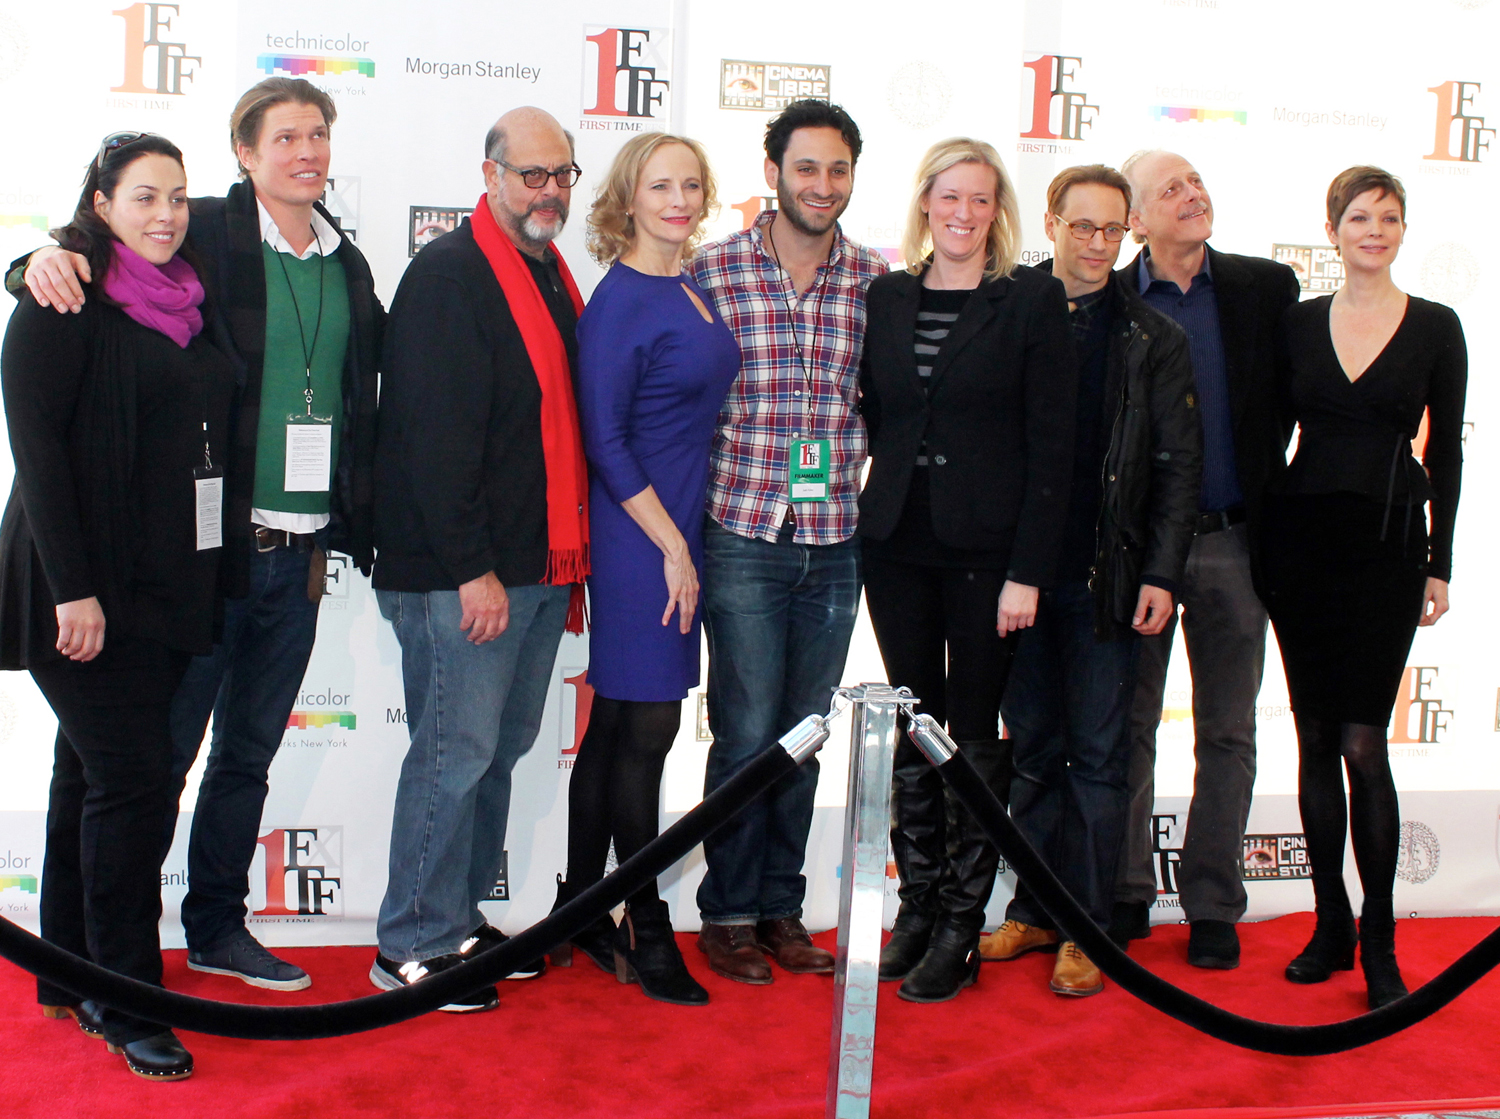 (l to r) Joanna Bennett, Alex Cendese, Fred Melamed, Laila Robins, Seth Fisher, Mandy Ward, Kevin Isola, Mark Blum, Lisa Masters at event for First Time Fest Film Festival screening of Blumenthal